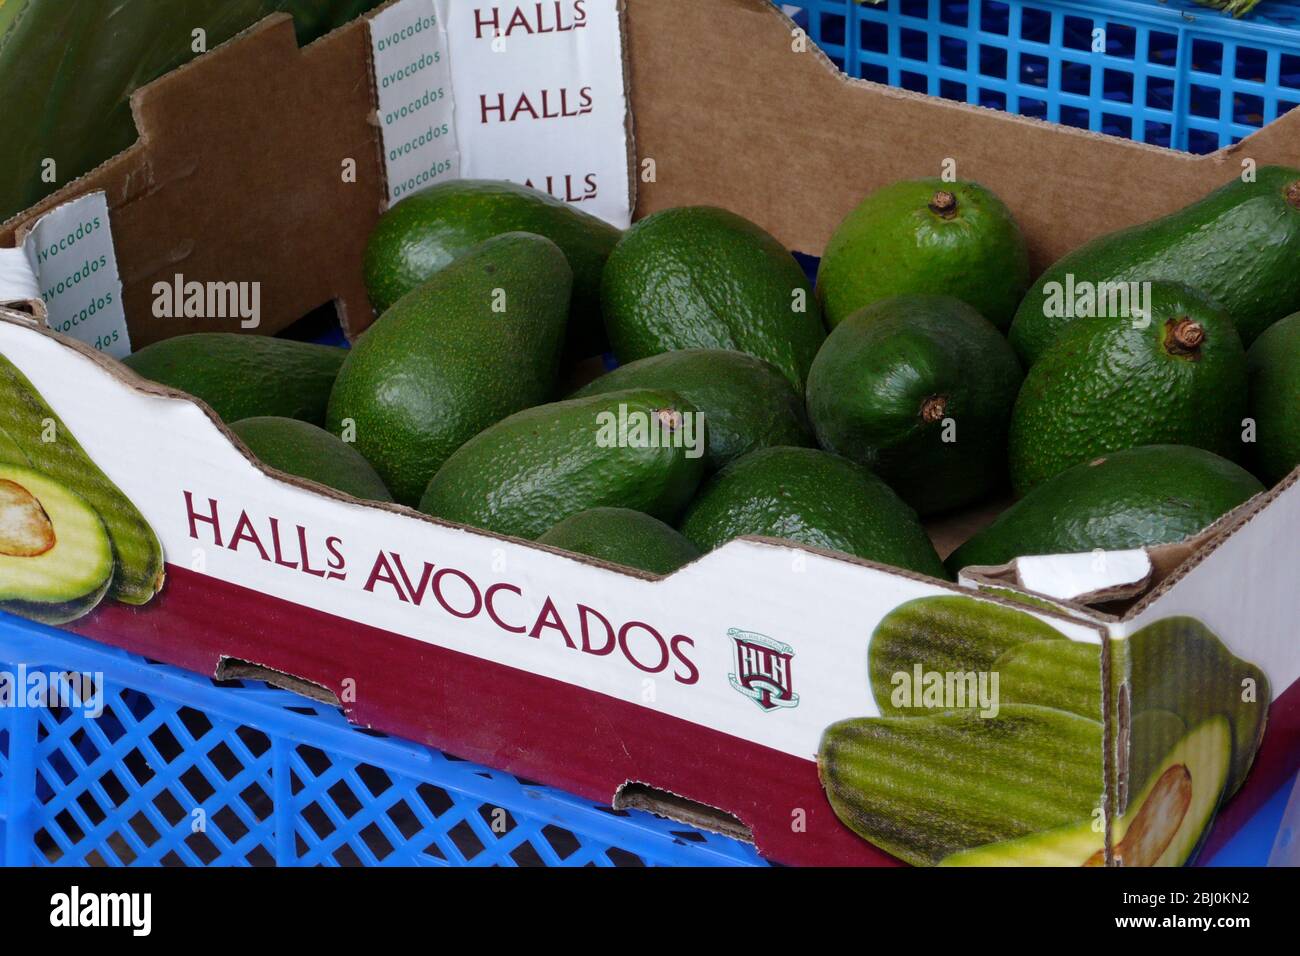 Box of fuerte avocados from Halls, in South Africa for sale in Edenbridge, Kent - Stock Photo